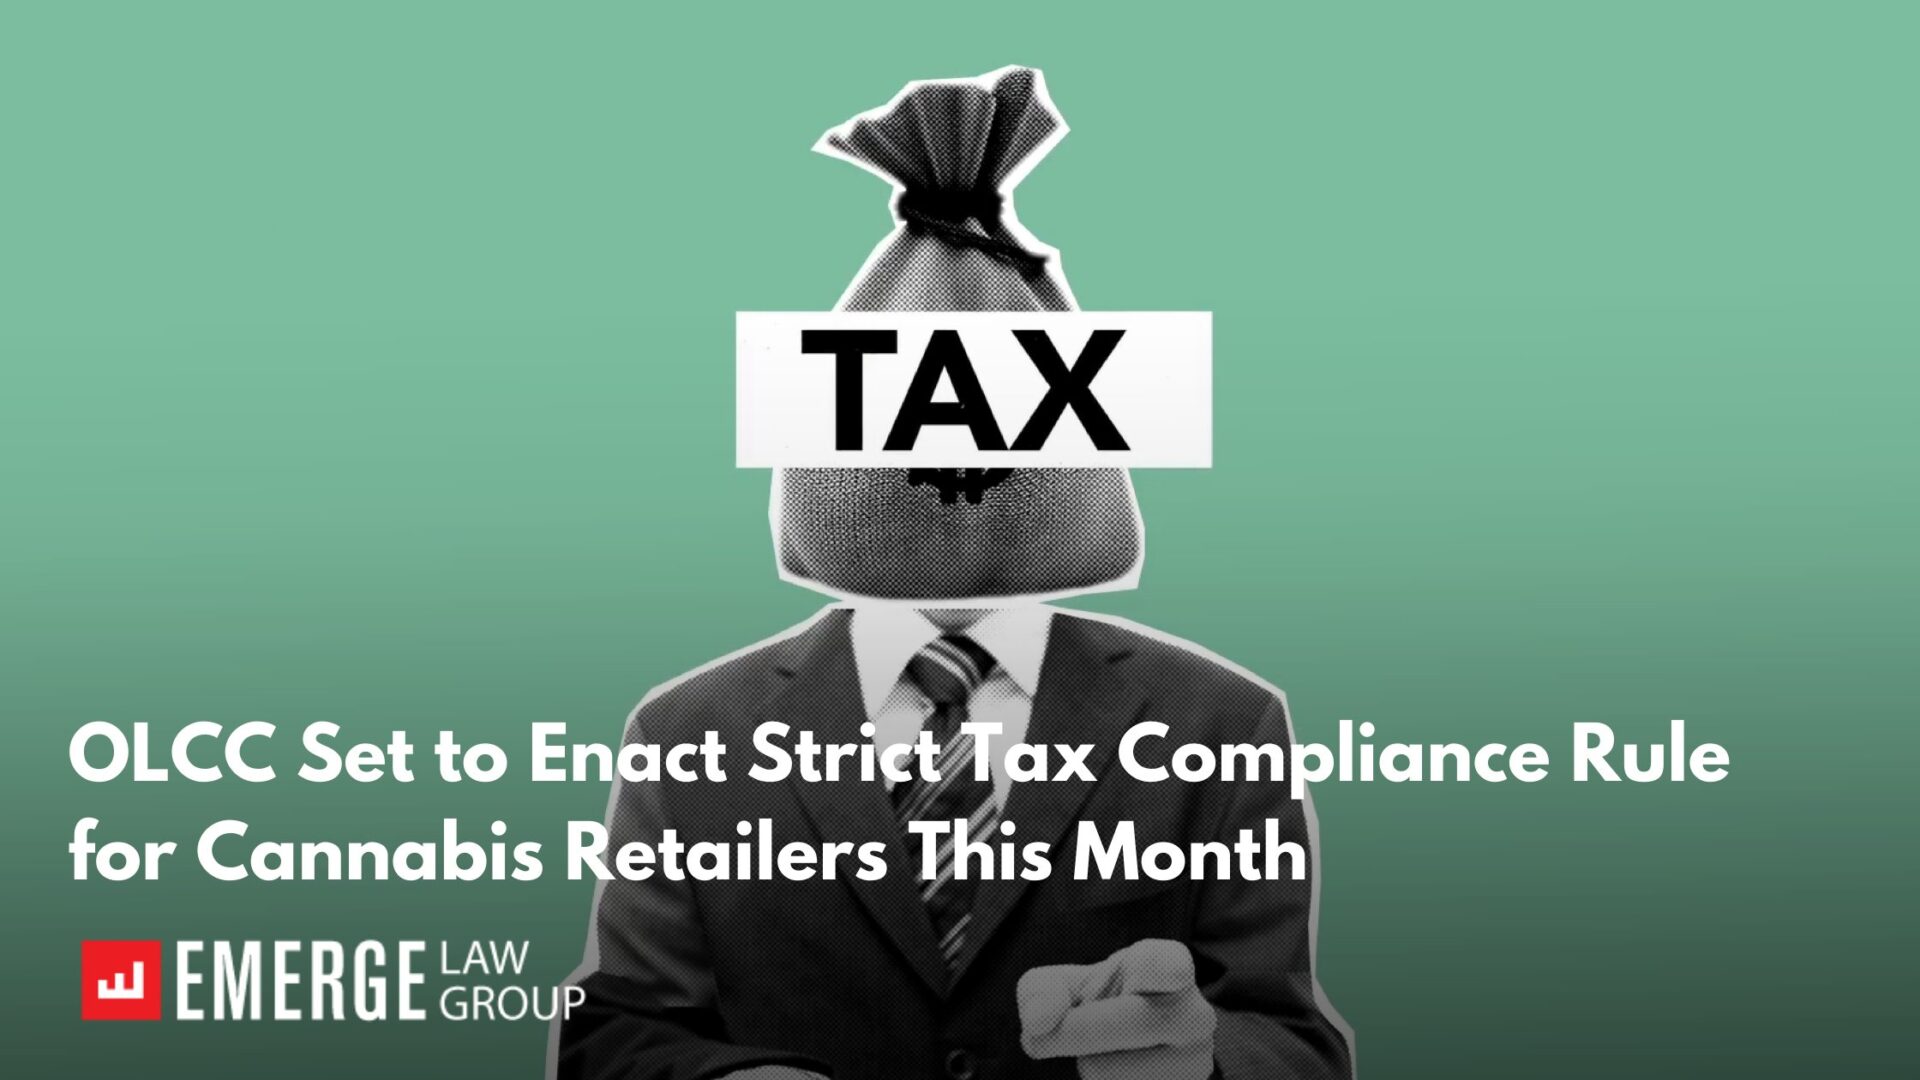 OLCC Set to Enact Strict Tax Compliance Rule for Cannabis Retailers This Month